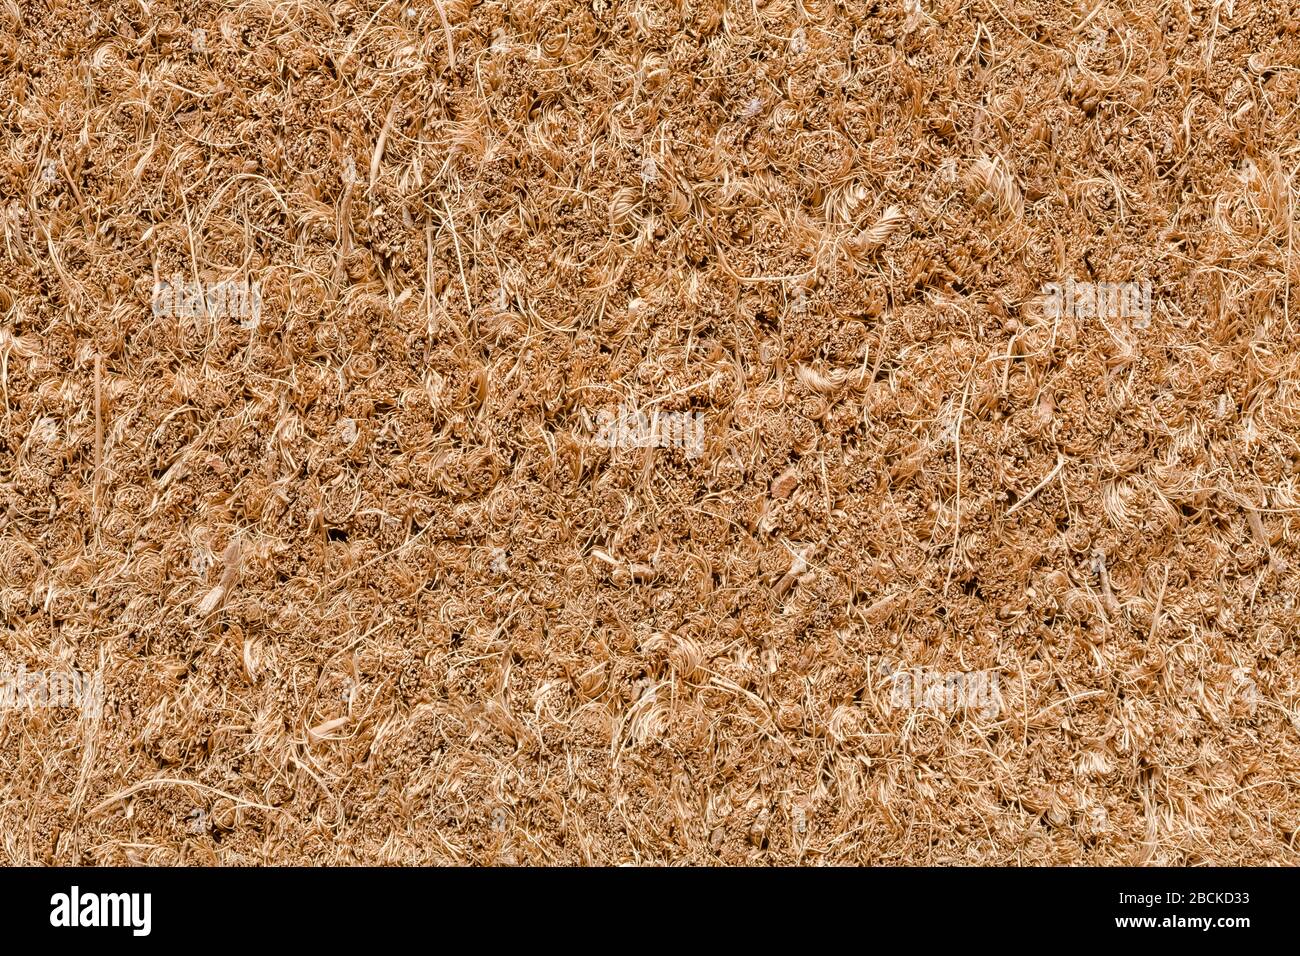 https://c8.alamy.com/comp/2BCKD33/closeup-of-brown-coir-door-mat-suitable-for-use-as-a-texture-or-background-2BCKD33.jpg